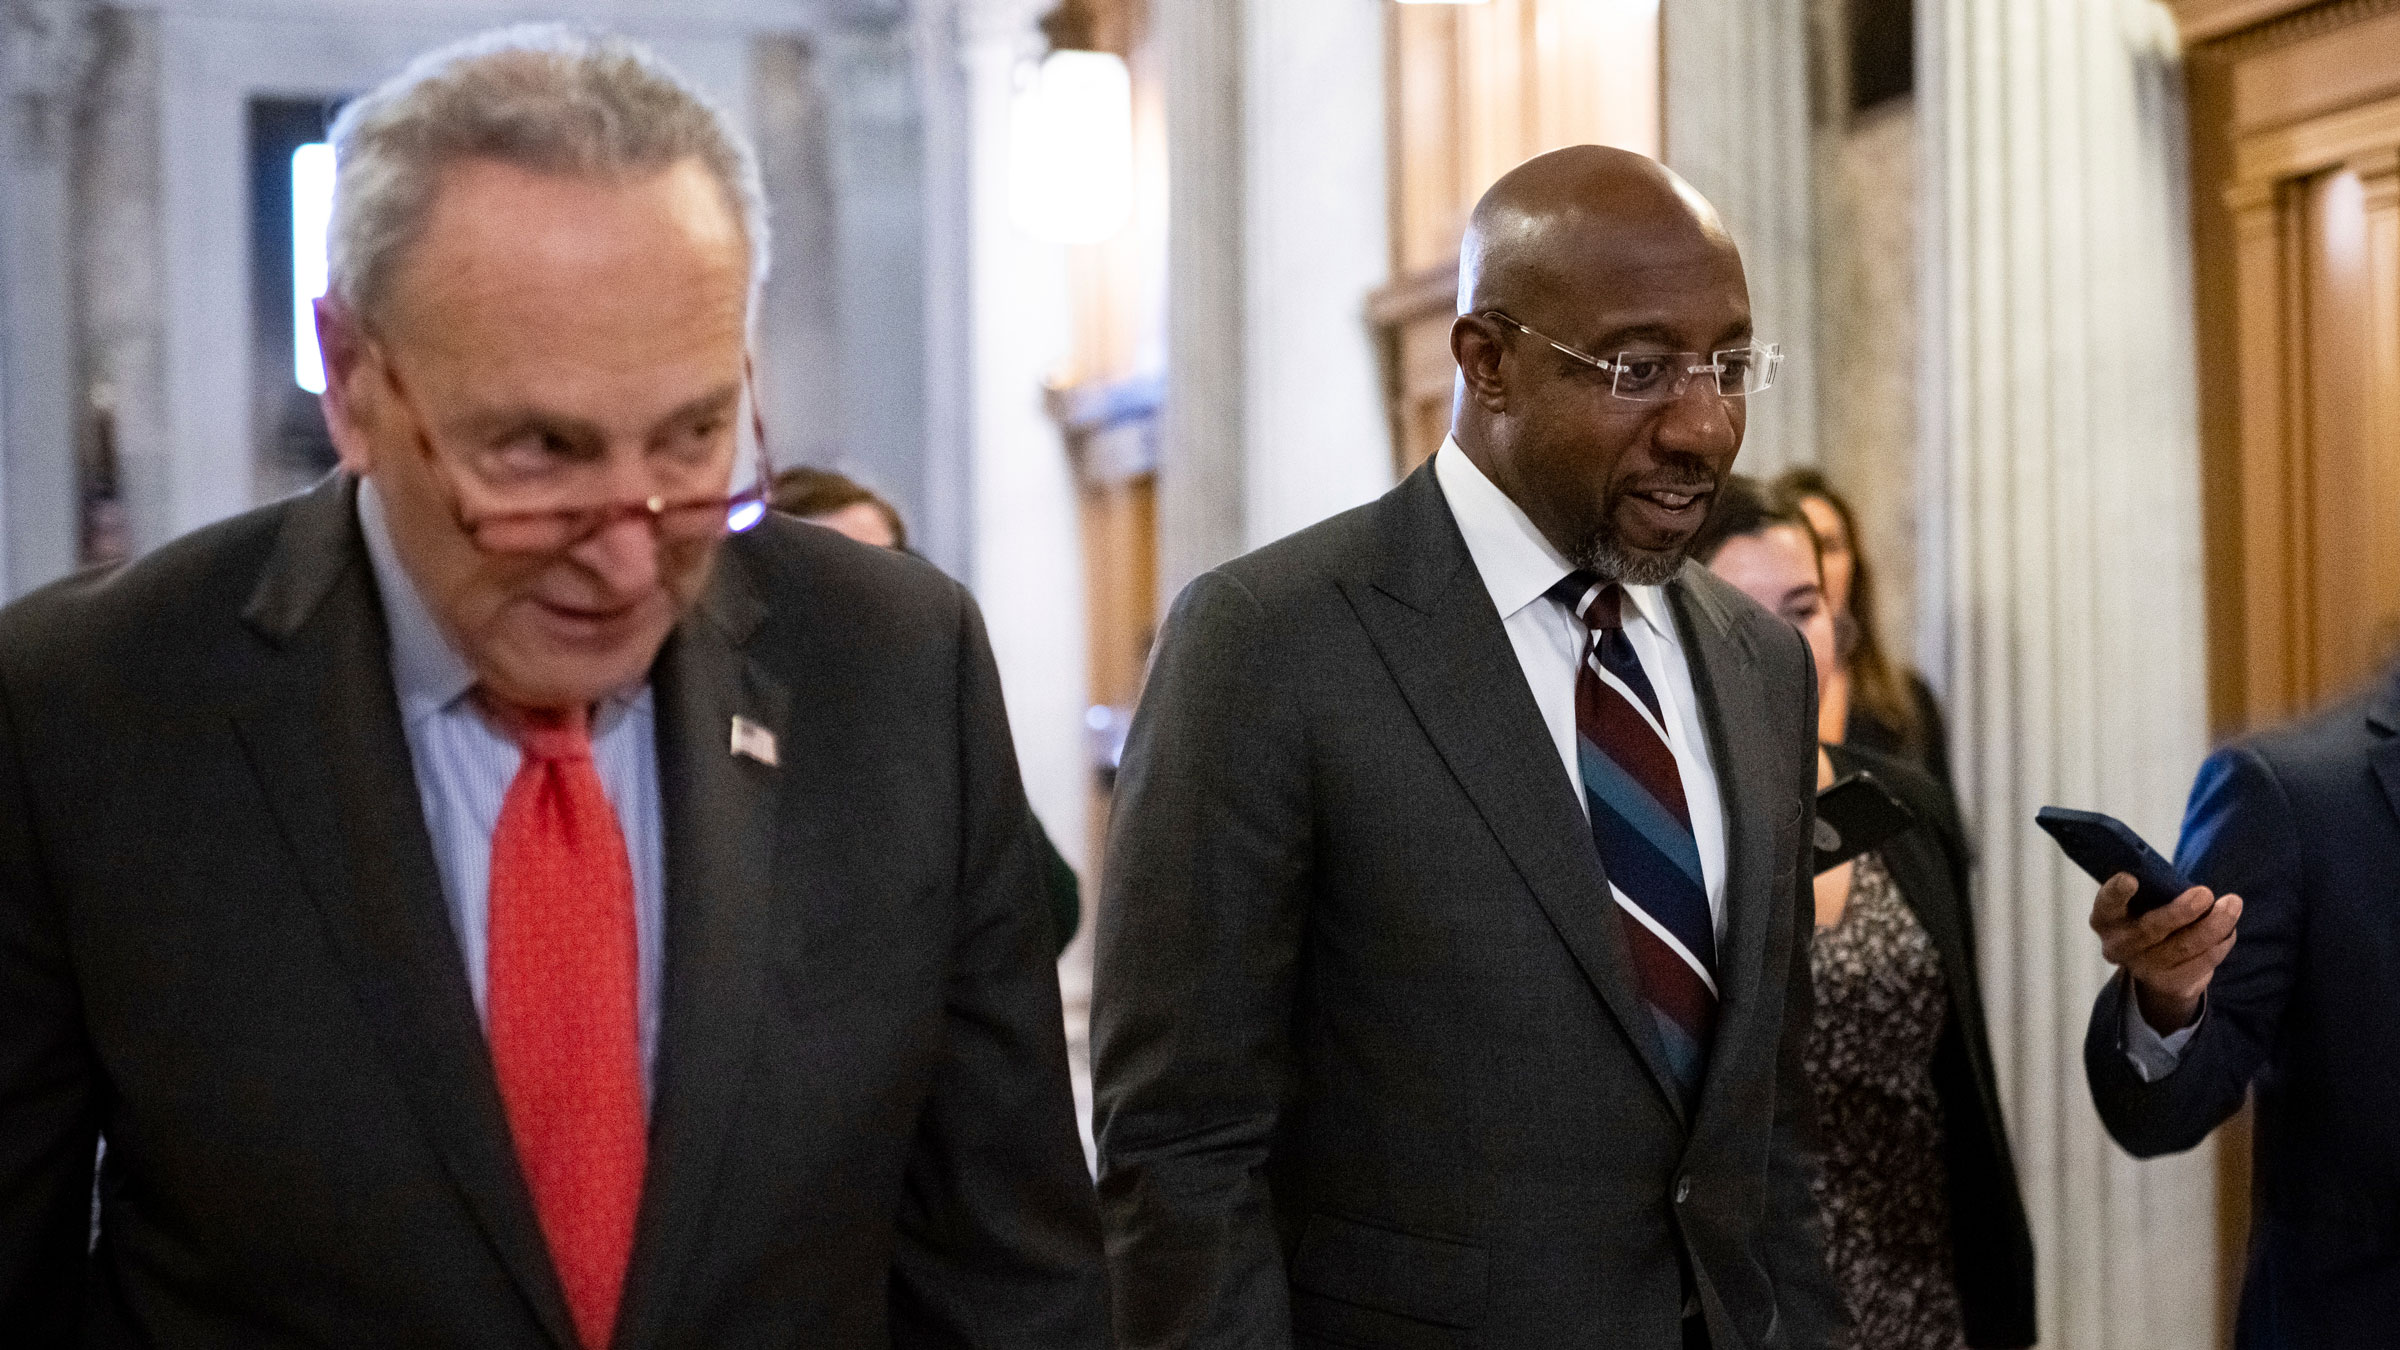 US Sen. Raphael Warnock, right, speaks to the media as he walks with Senate Majority Leader Chuck Schumer at the US Capitol on Wednesday.